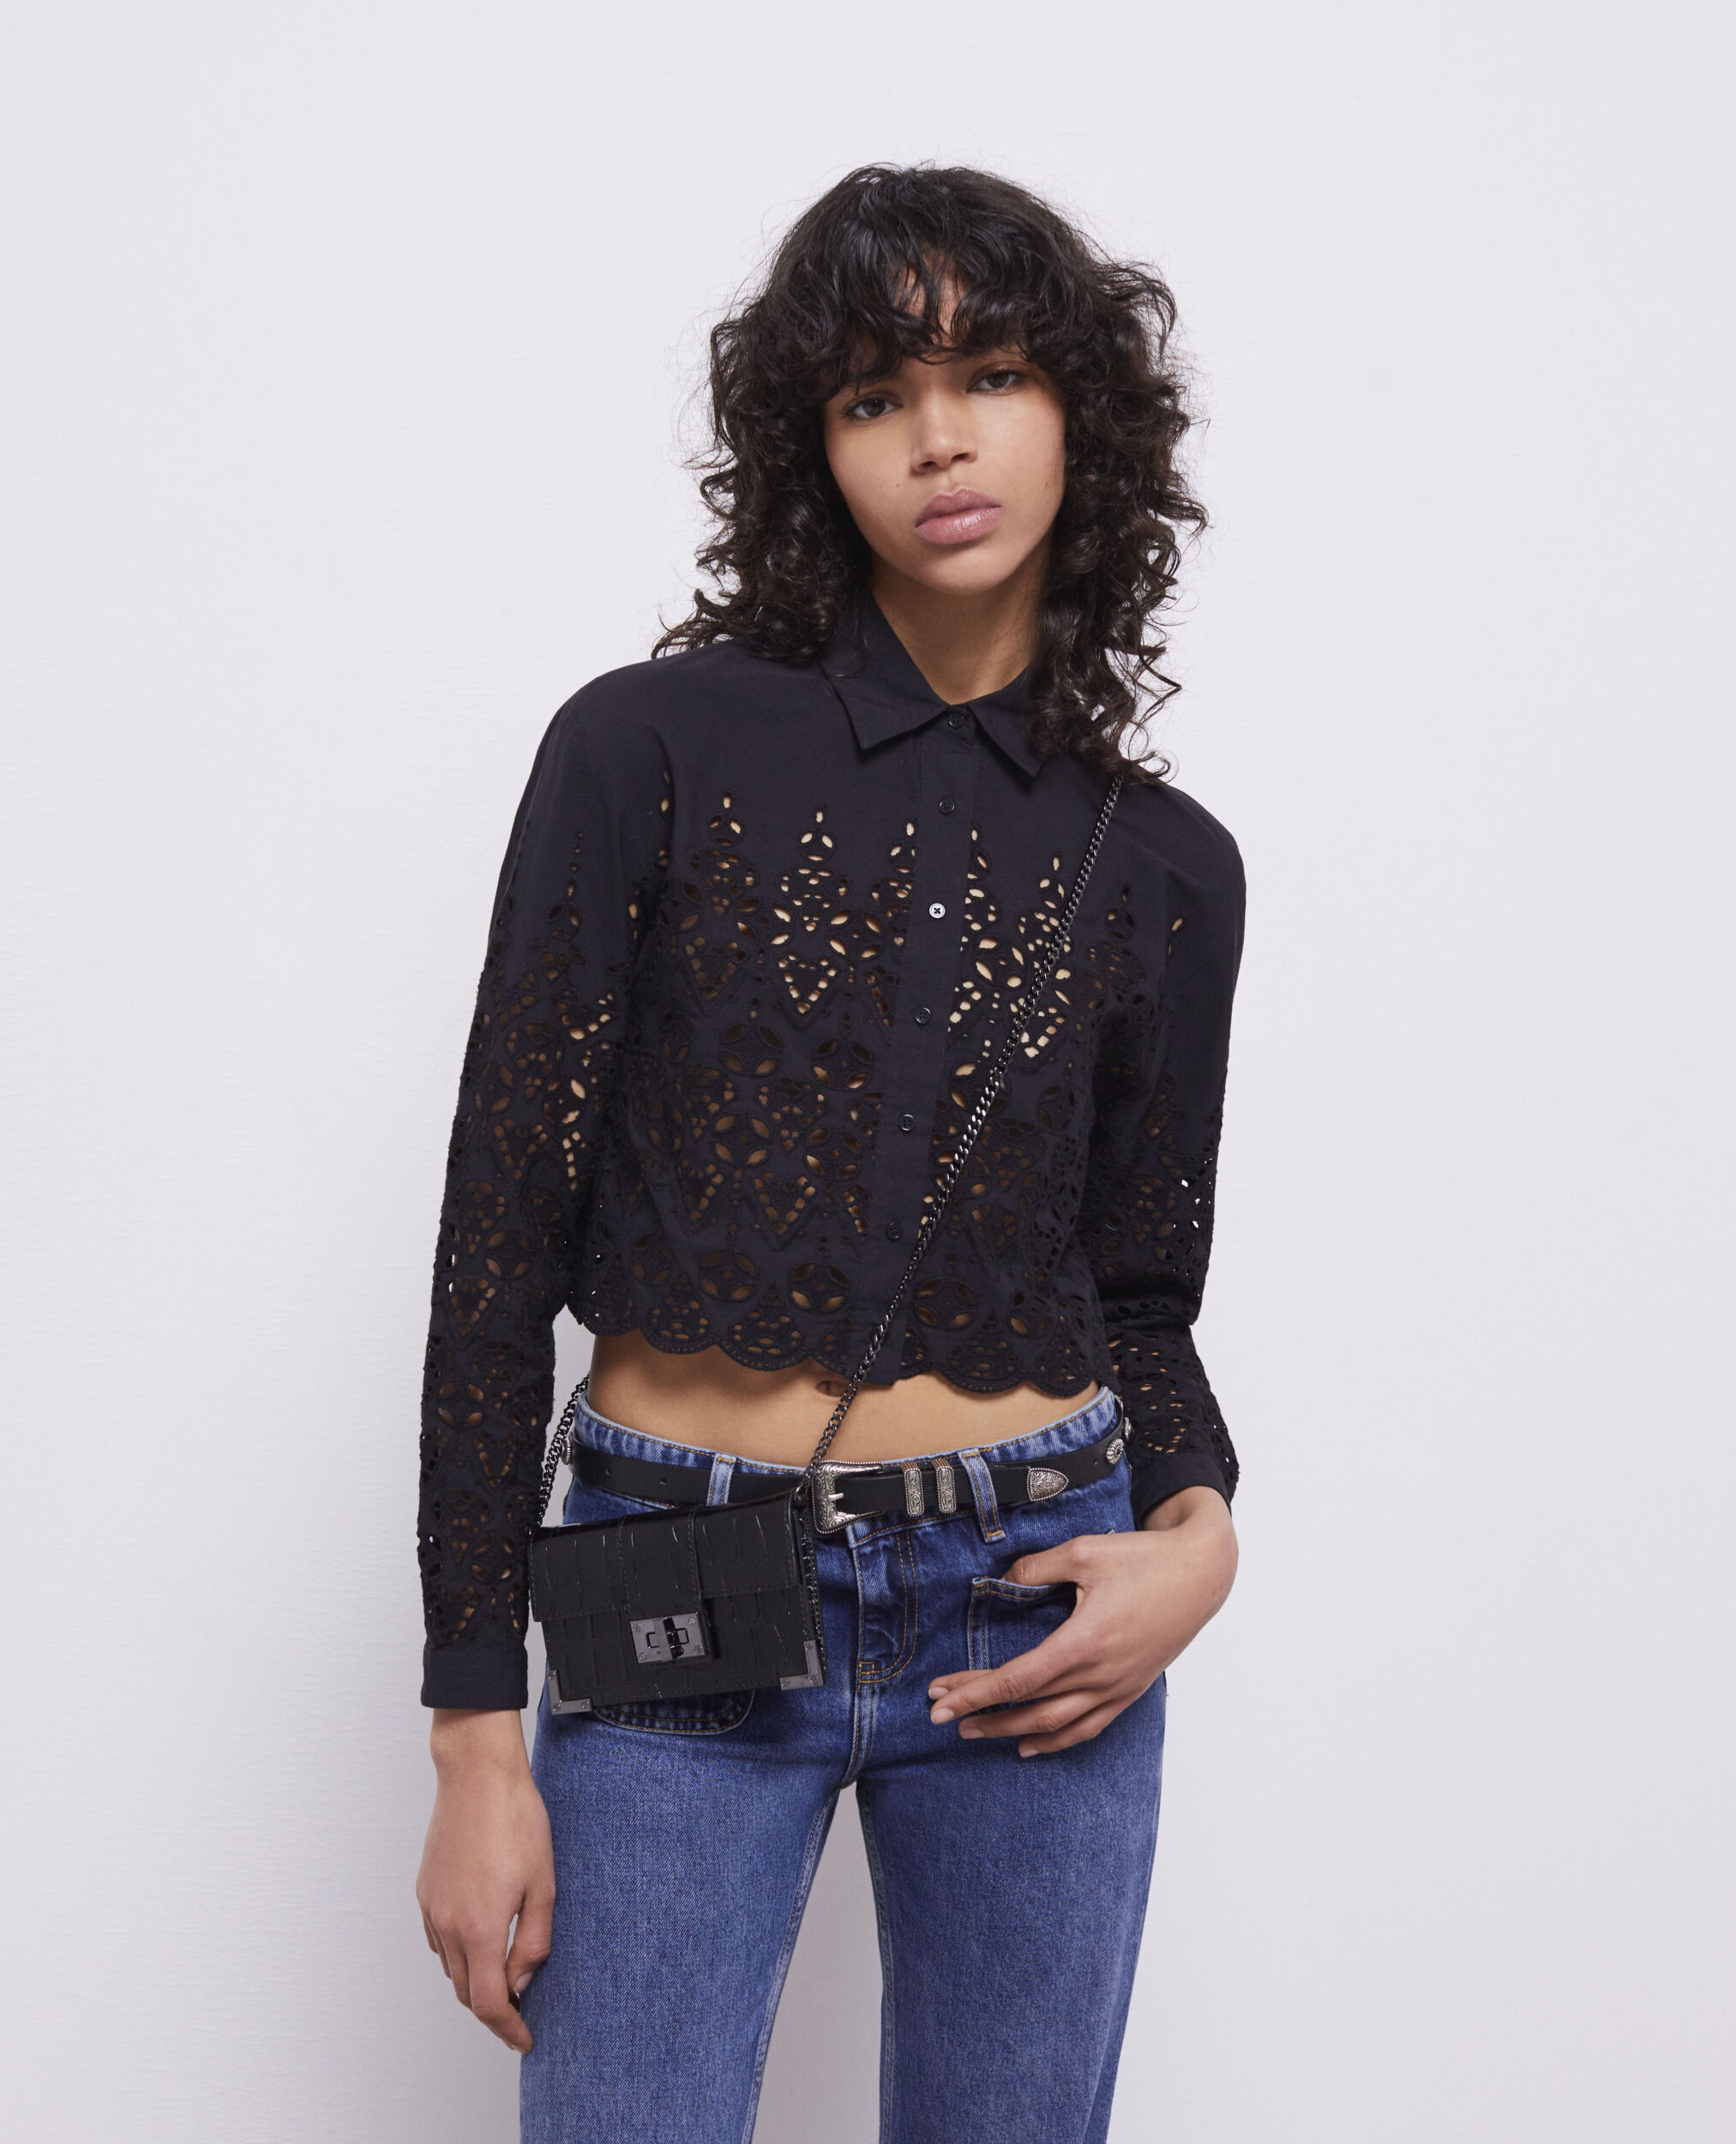 Skynd dig edderkop Tragisk Short black shirt with broderie anglaise | The Kooples - US